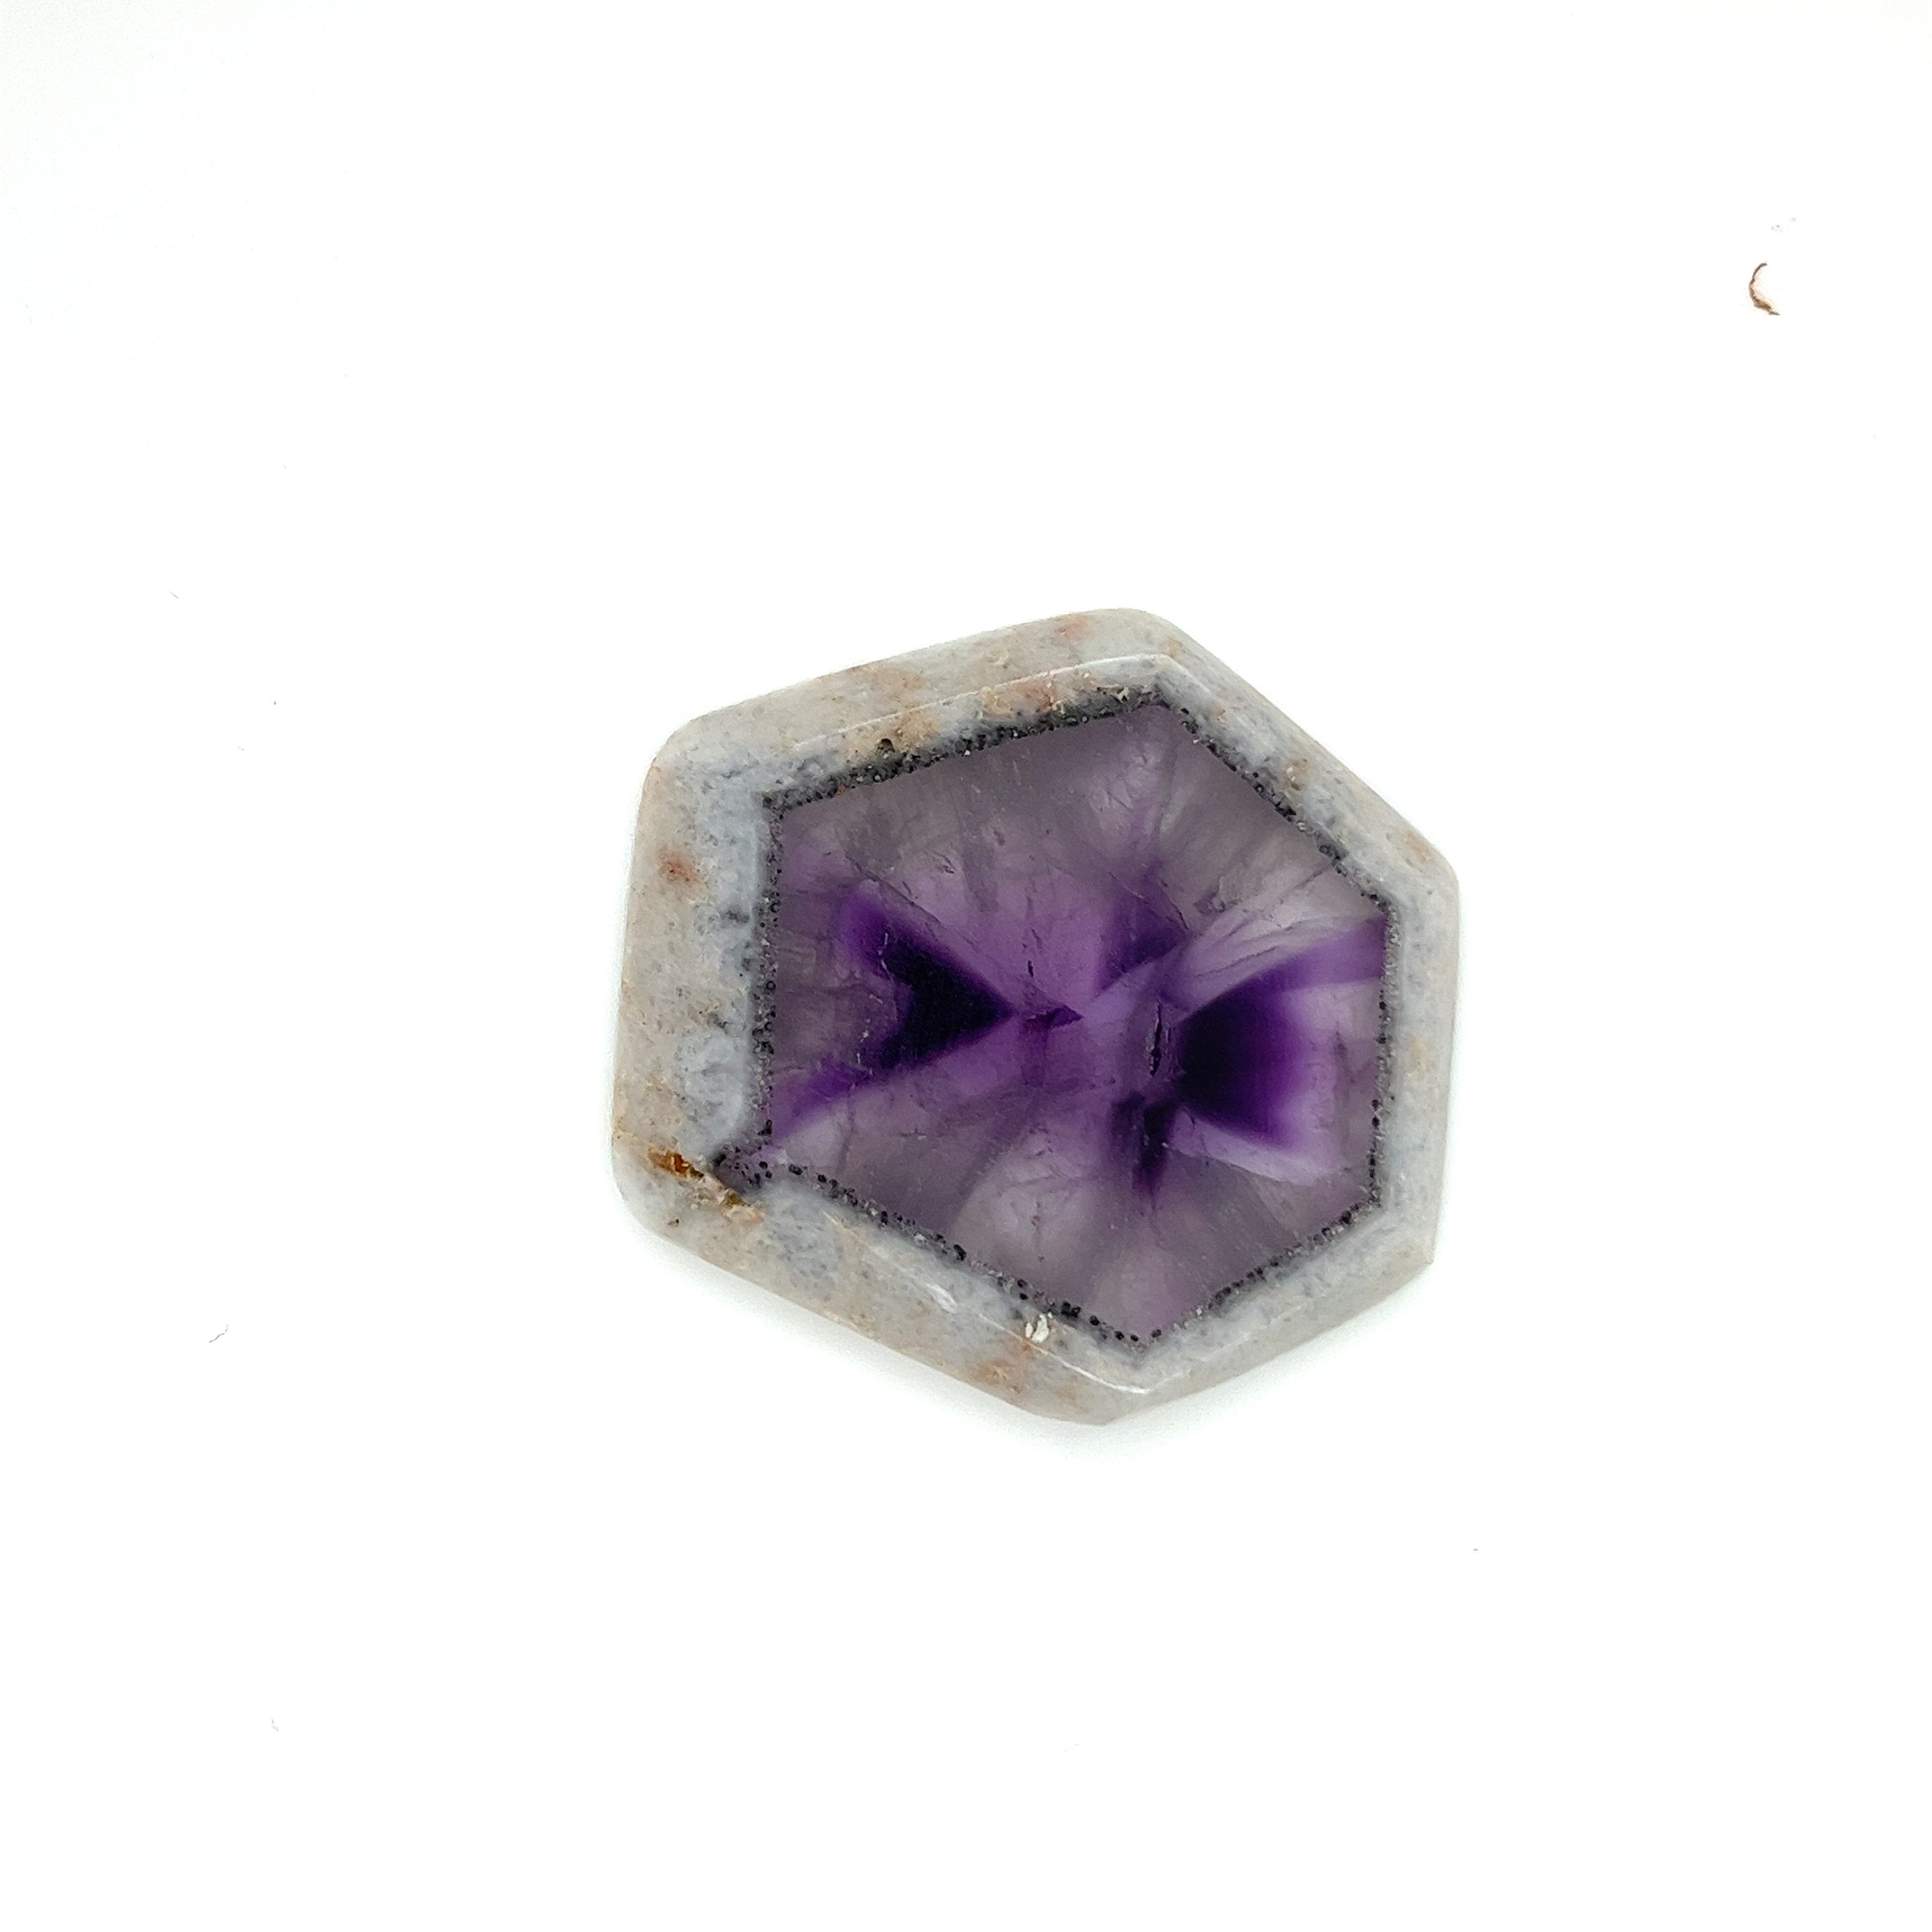 Trapiche Amethyst; Natural Untreated India Amethyst Slice, 18 grams - Mark Oliver Gems